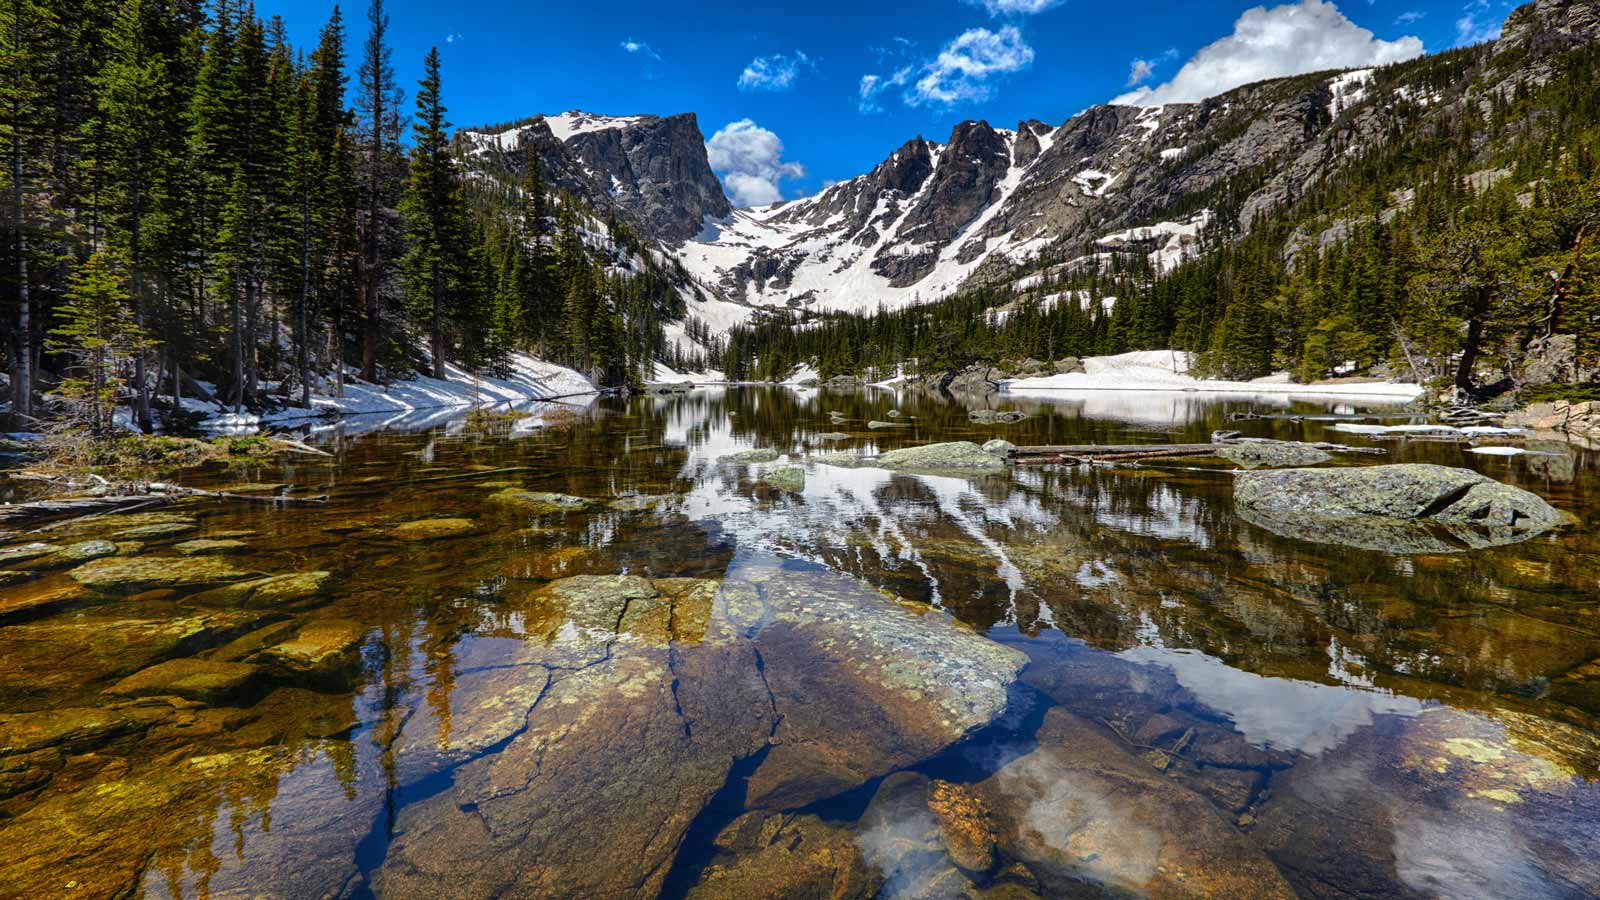 <p>Without a doubt, one of the best things to do in Colorado is visit Rocky Mountain National Park. With its postcard-worthy mountains, thriving greenery, and incredible wildlife, it’s breathtaking.</p><p>If there’s just one activity you must do at <a href="https://www.nps.gov/romo/index.htm" rel="nofollow noopener">Rocky Mountain National Park</a>, it’s a hike. Some of the best trails include the 3-mile Emerald Lake Trail, the 1.6-mile Alberta Falls Trail, and the 7.4-mile Twin Sisters Peak Trail.</p><p>Keep in mind, due to the popularity of Rocky Mountain National Park; the park is now functioning under a timed entry system during certain times of the year. This means that during peak season (a.k.a. summer), you’ll need to make reservations for your visit in advance on the <a href="https://www.recreation.gov/timed-entry/10086910" rel="nofollow noopener">recreation.gov website</a>.</p>